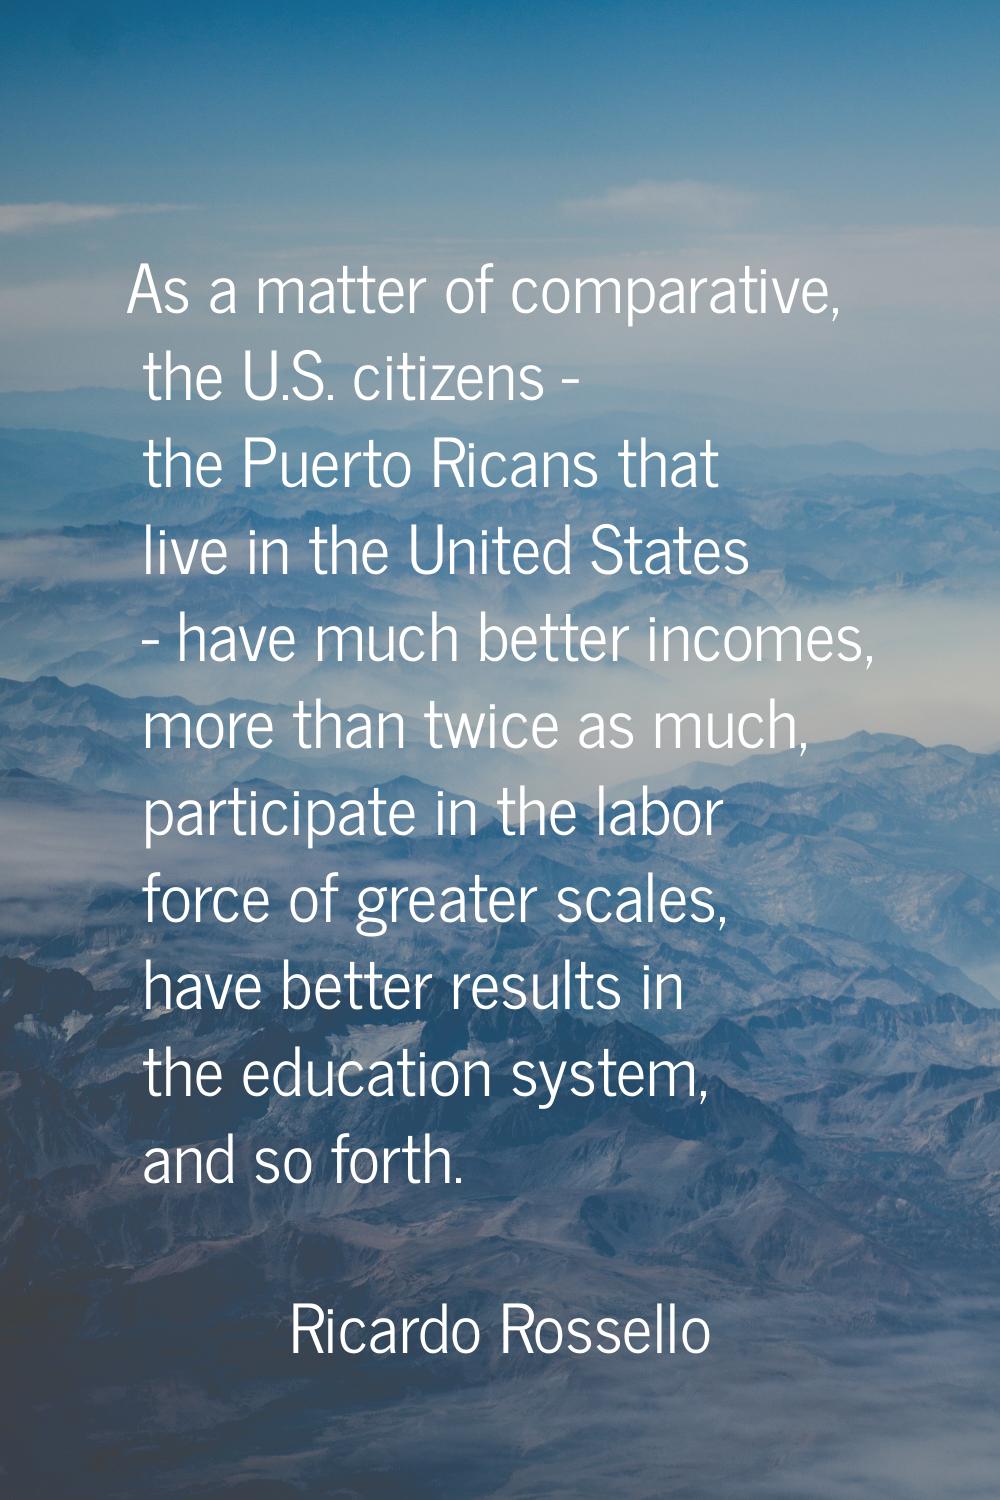 As a matter of comparative, the U.S. citizens - the Puerto Ricans that live in the United States - 